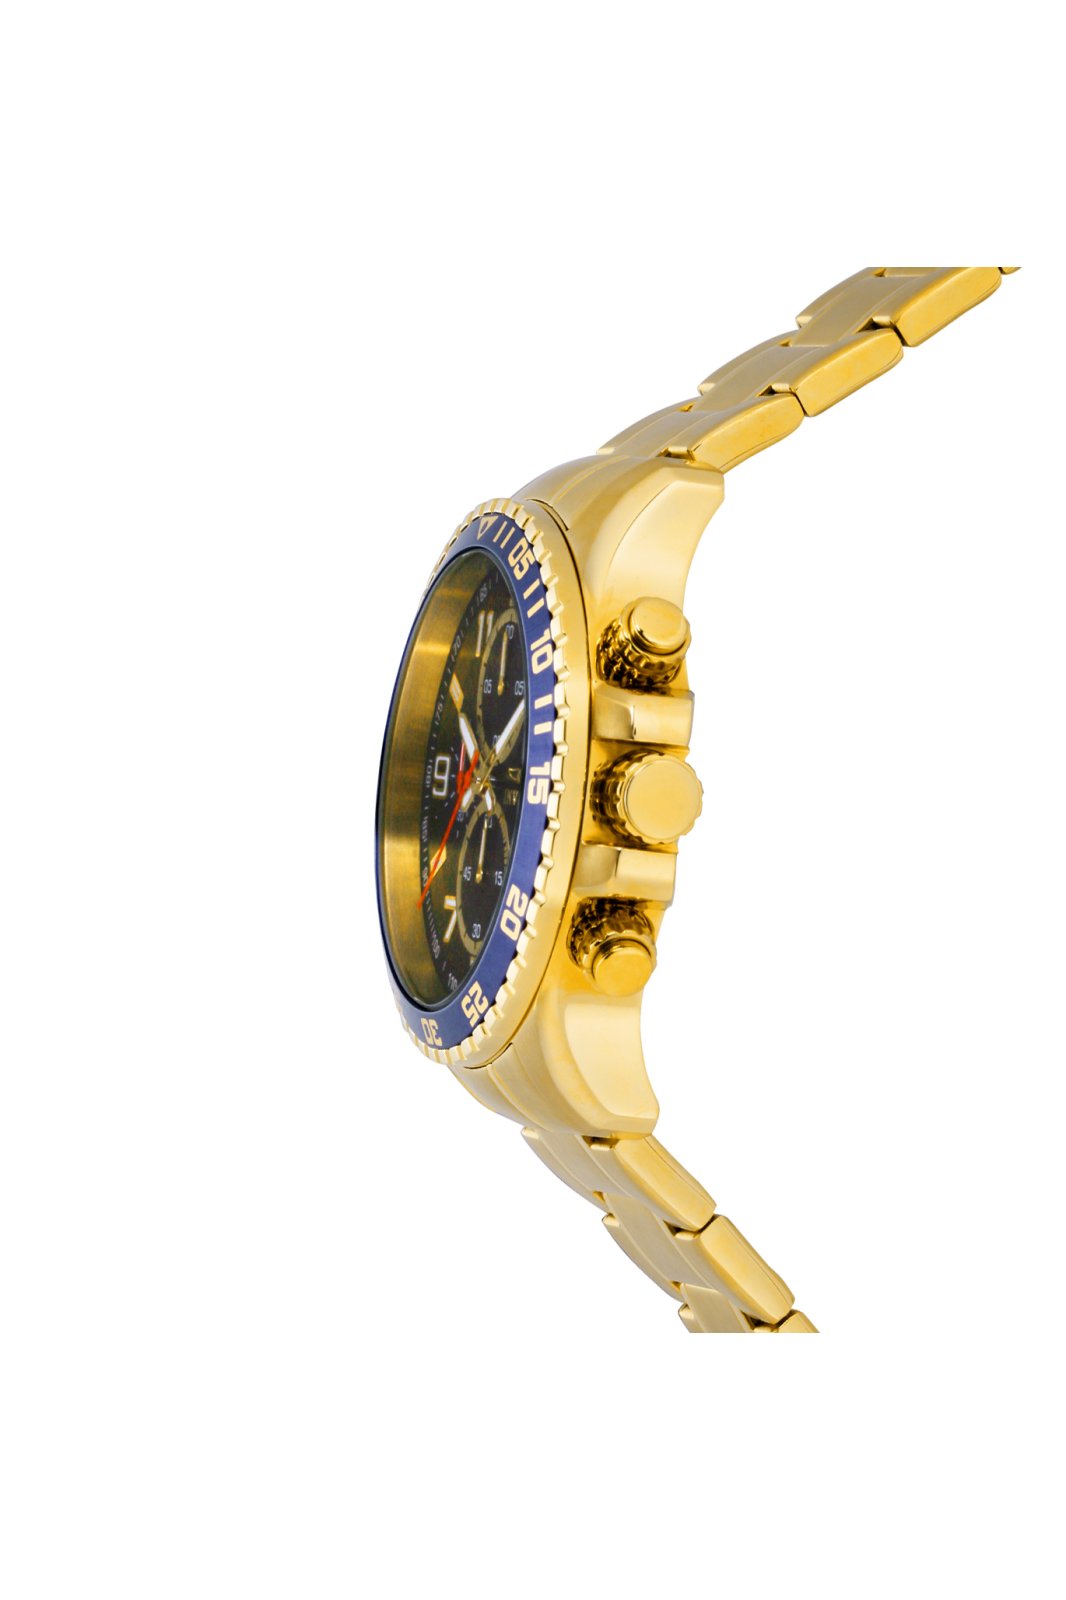 Invicta Watch Specialty 14878 - Official Invicta Store - Buy Online!